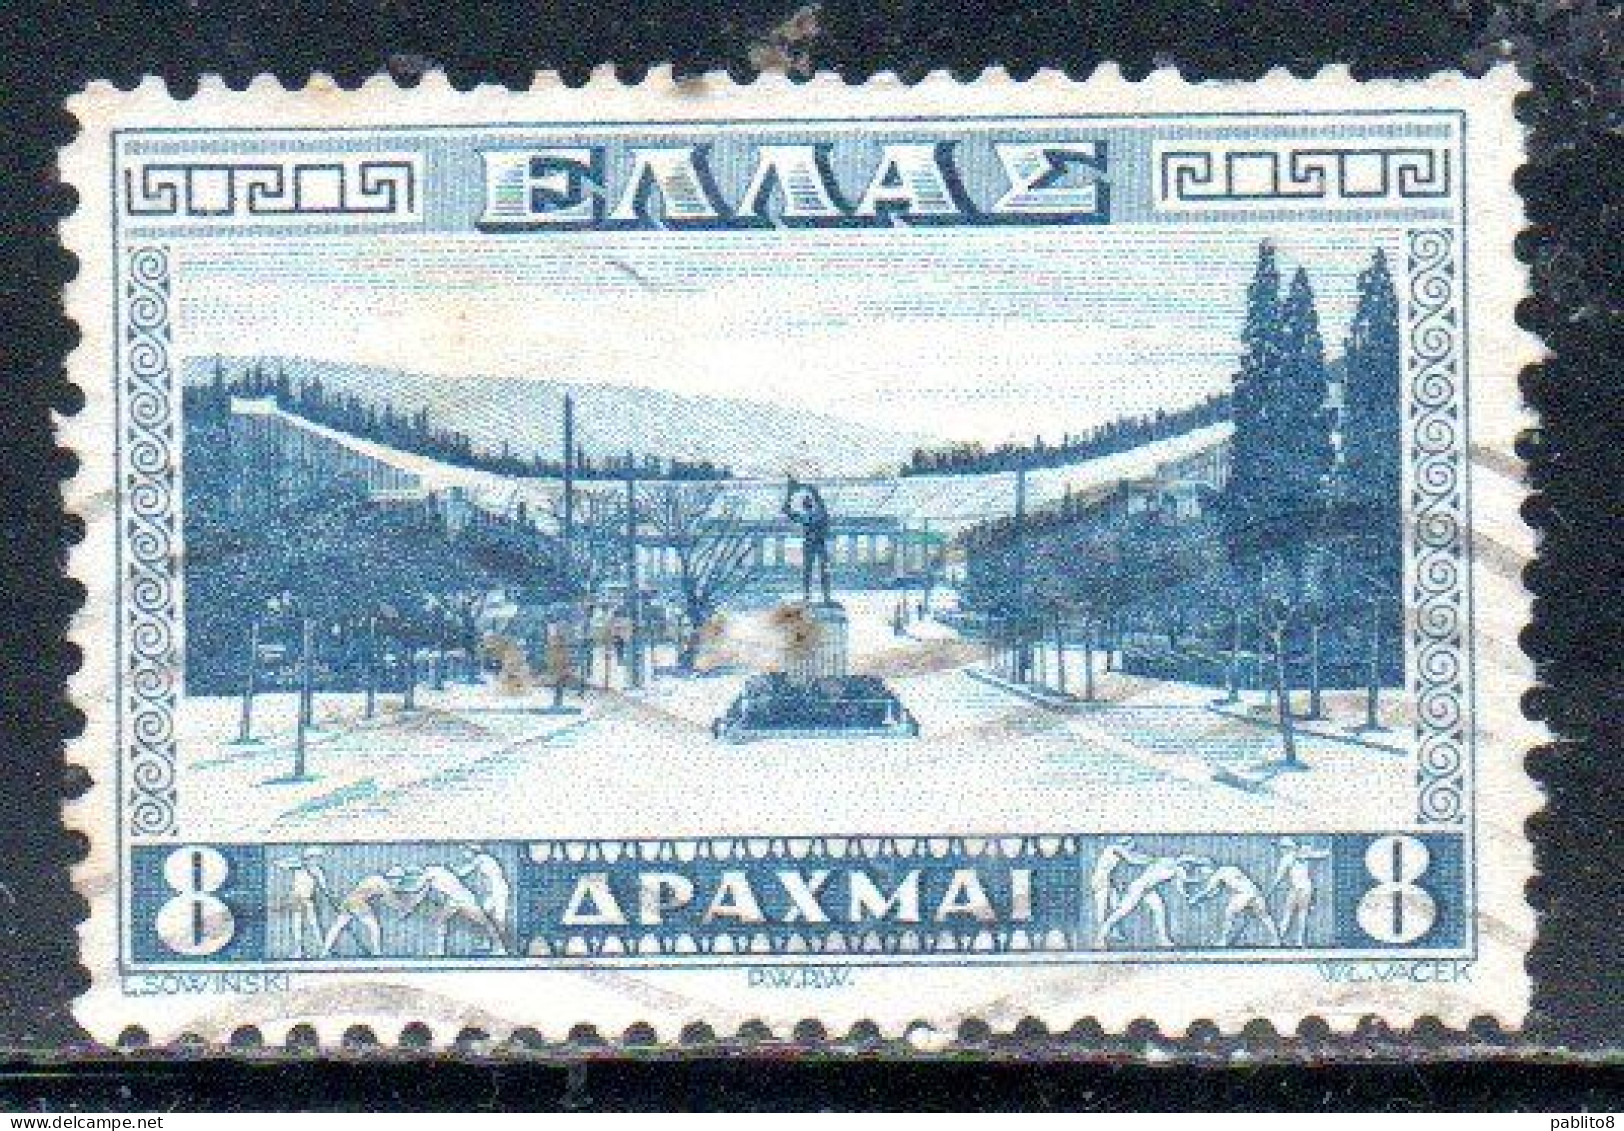 GREECE GRECIA HELLAS 1934 APPROACH TO ATHENS STADIUM 8d USED USATO OBLITERE' - Used Stamps